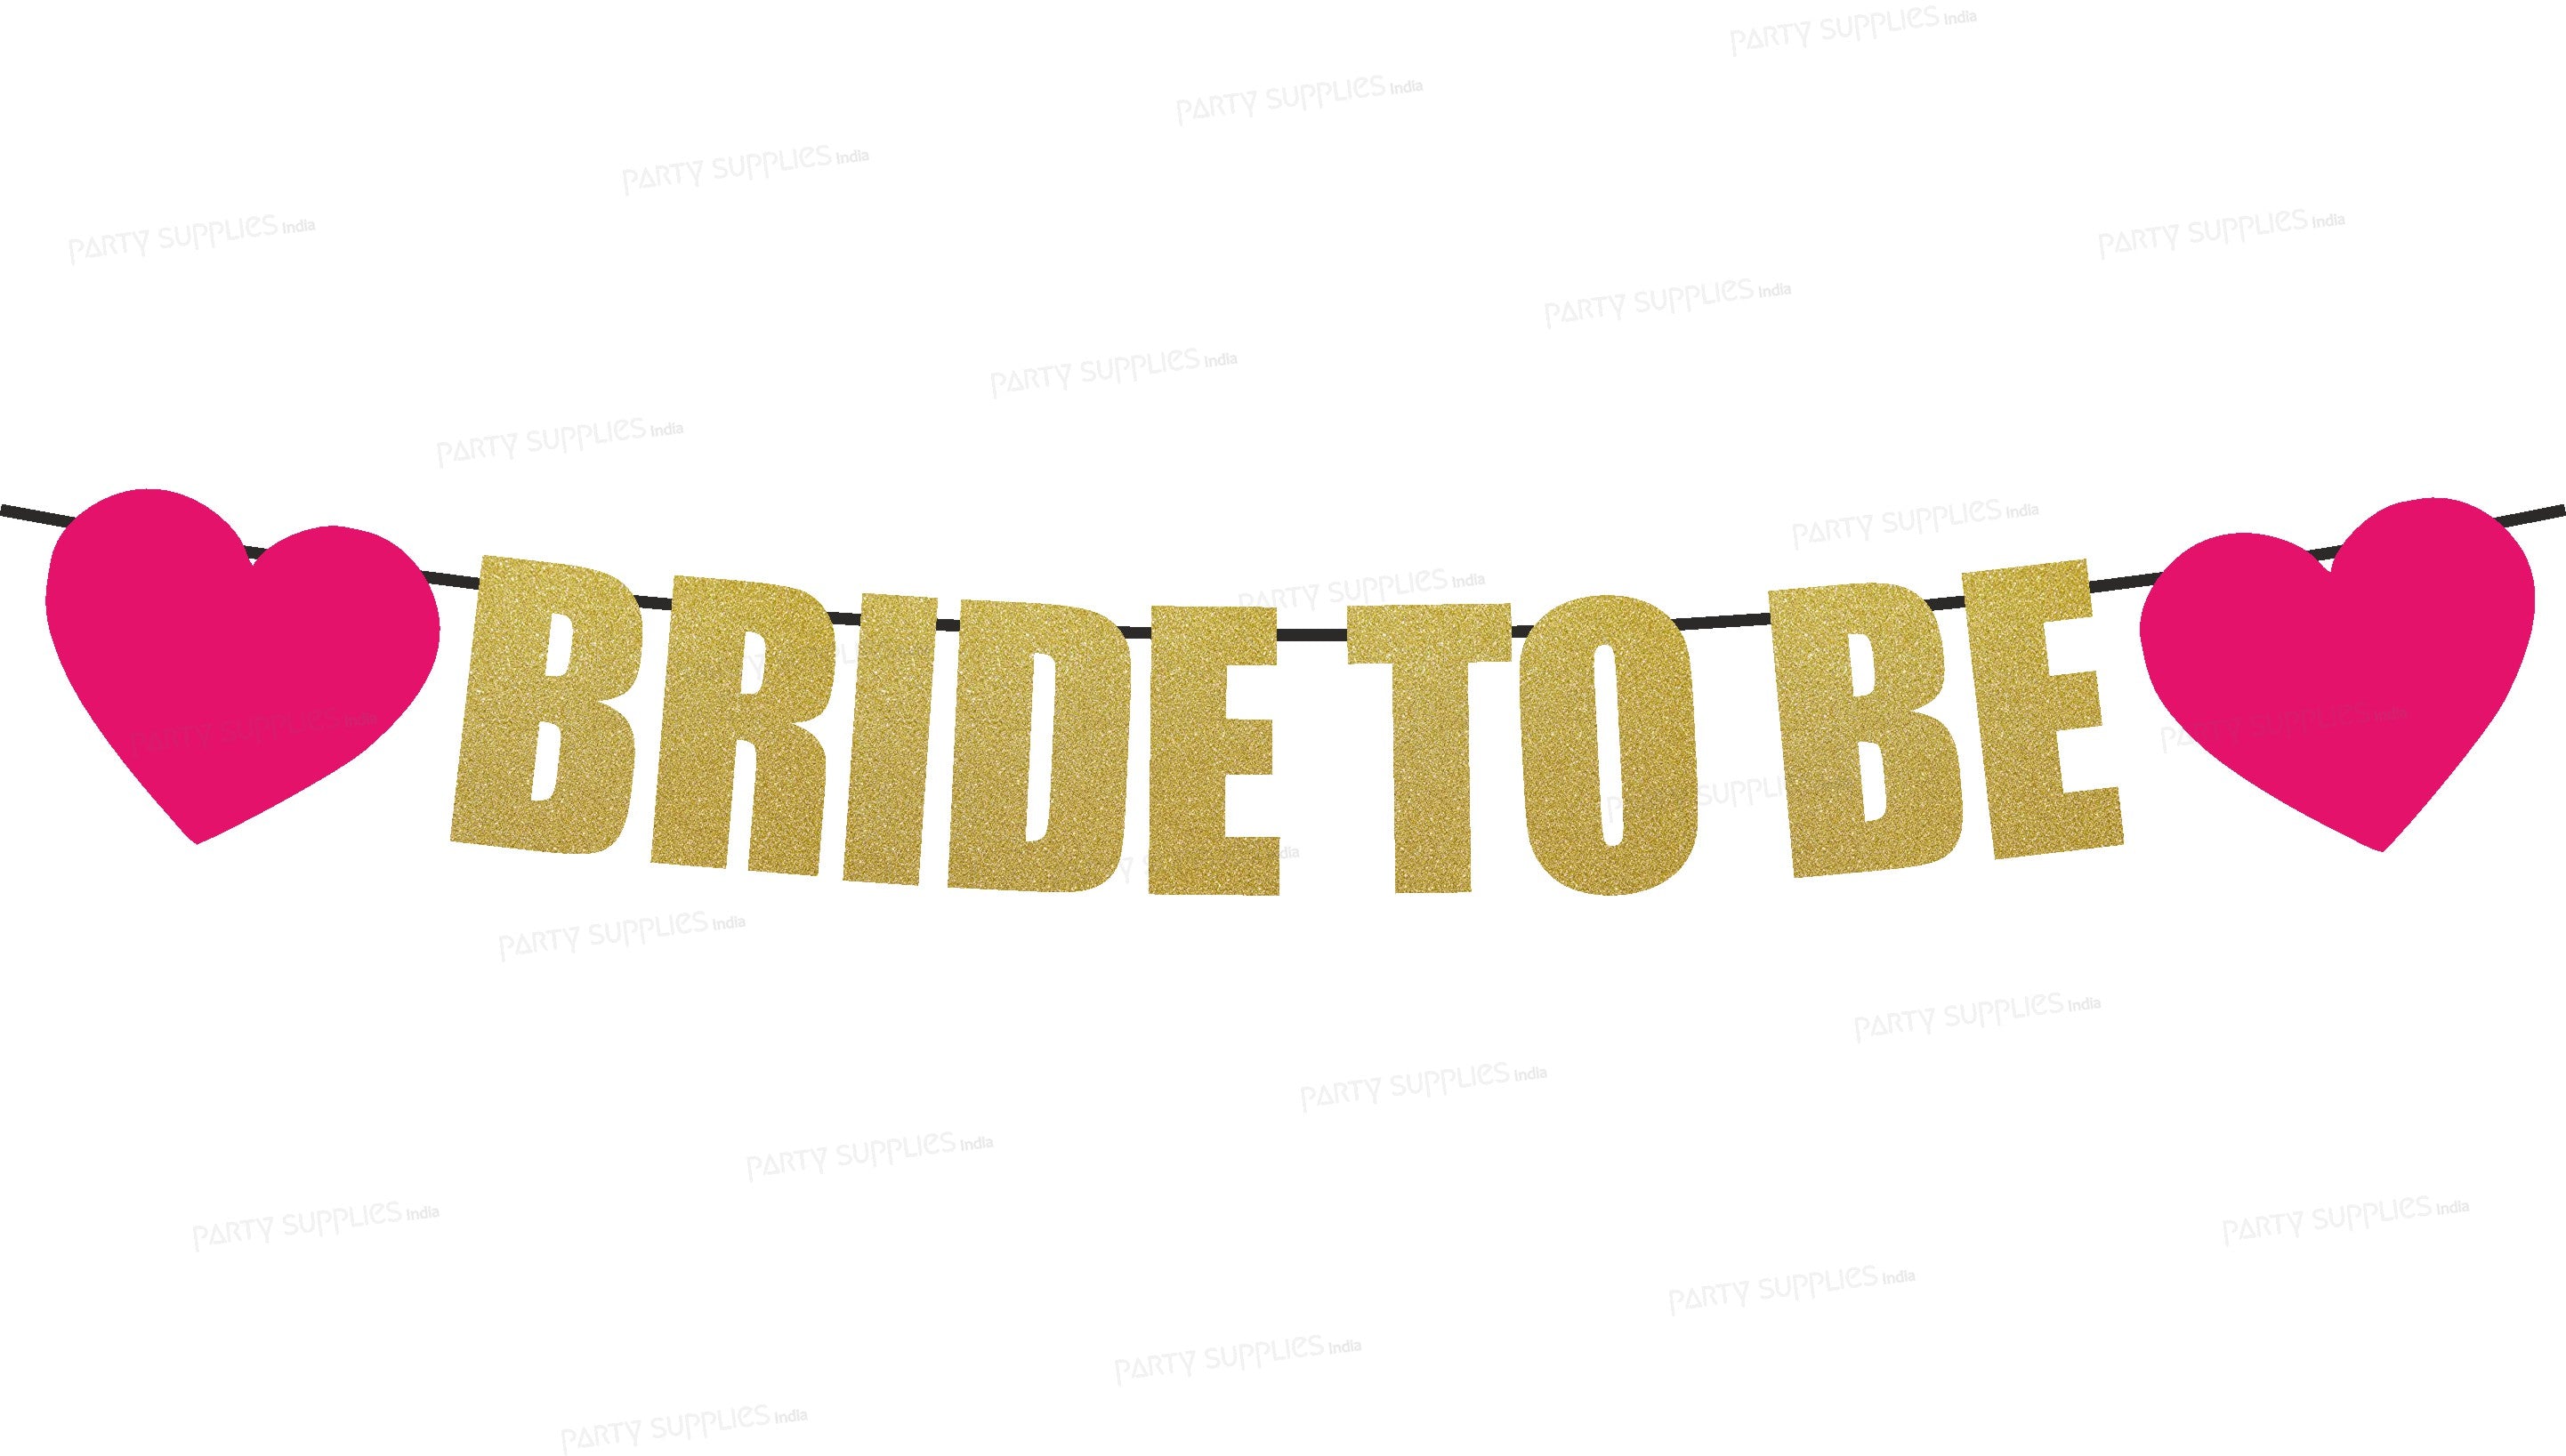 PSI Bride to Be Theme Customized  Hanging